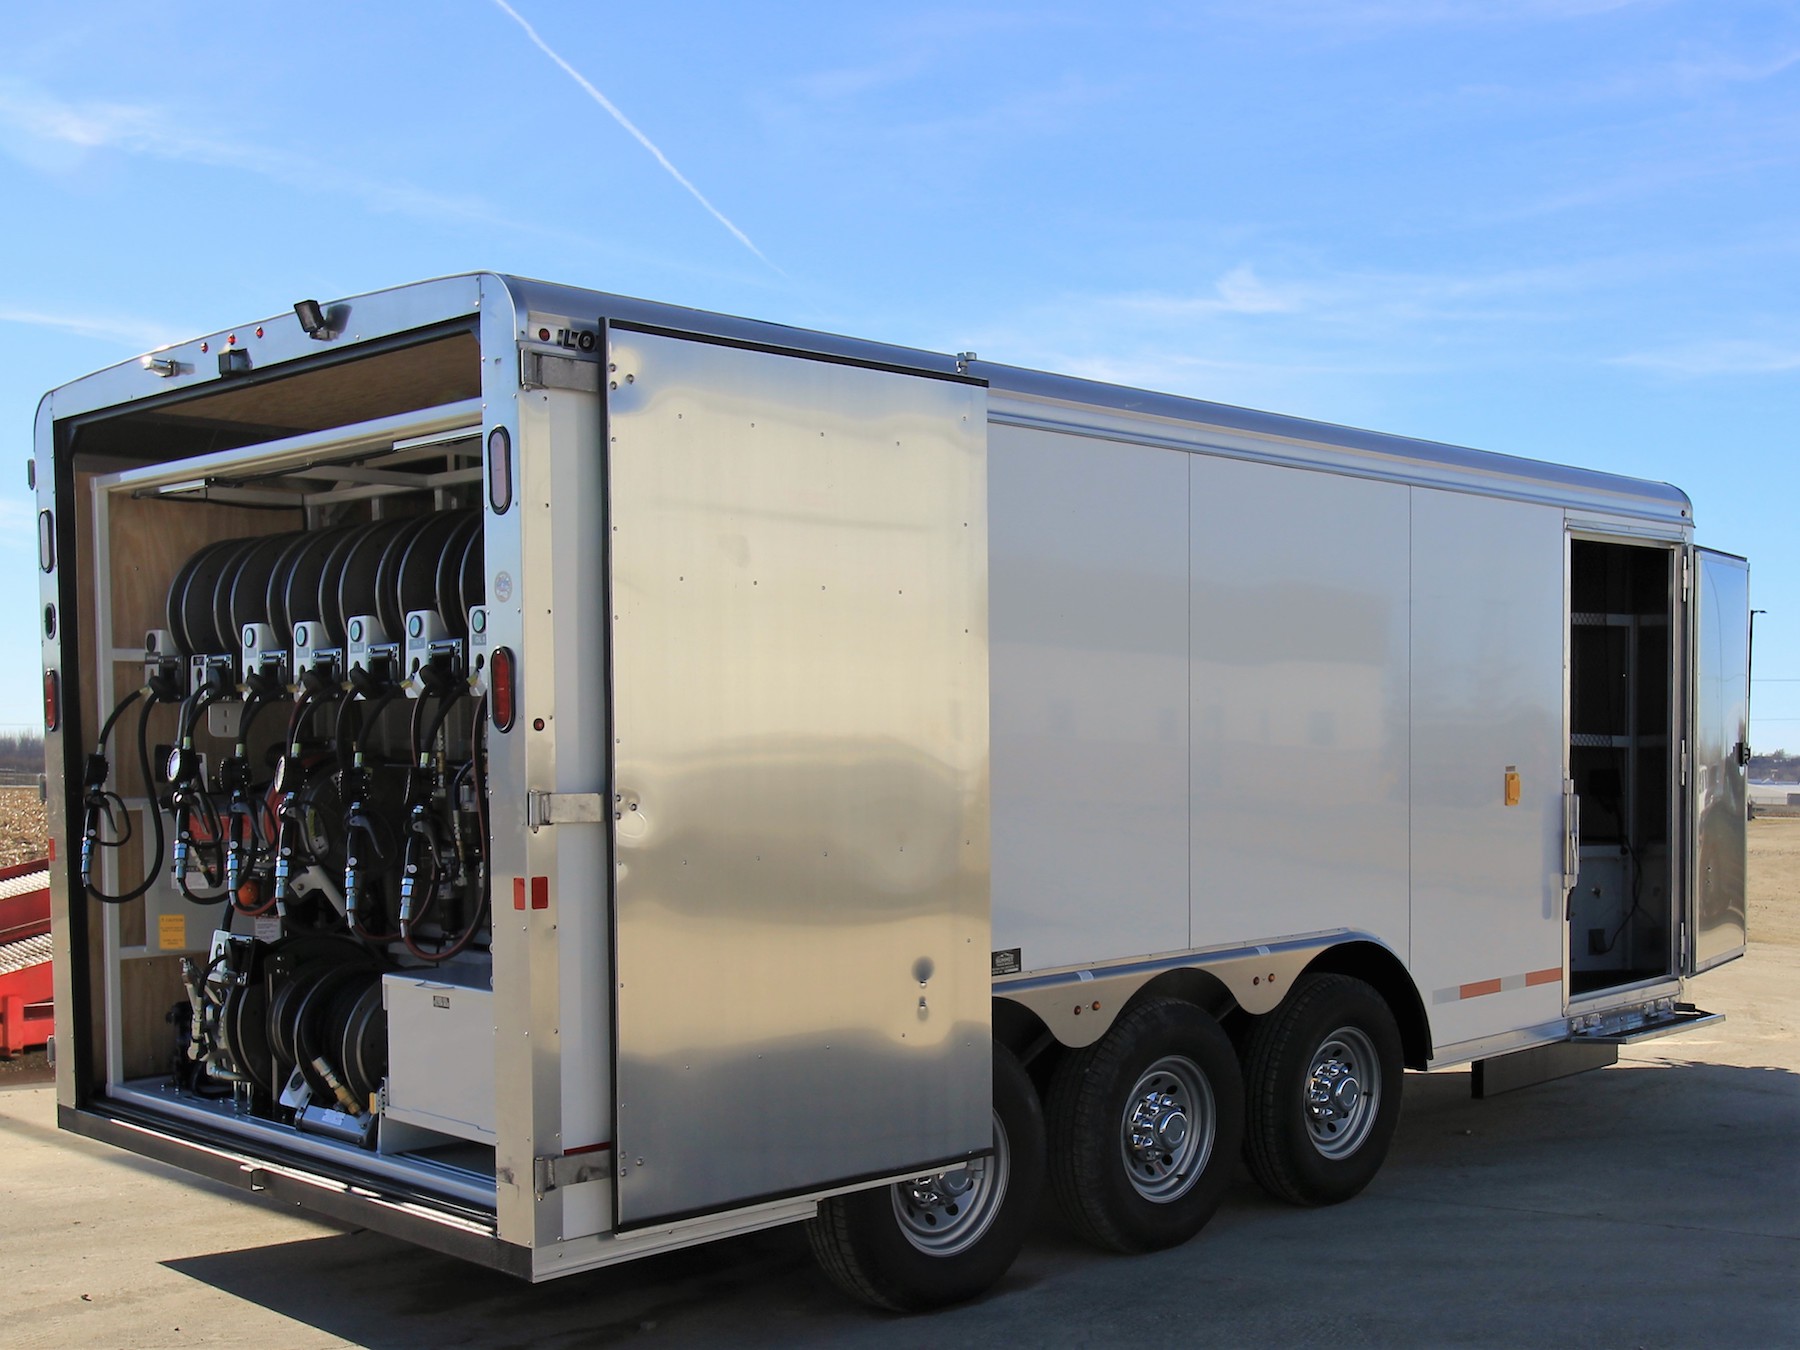 Summit lube trailer are a popular choisce for mobile lube equipment